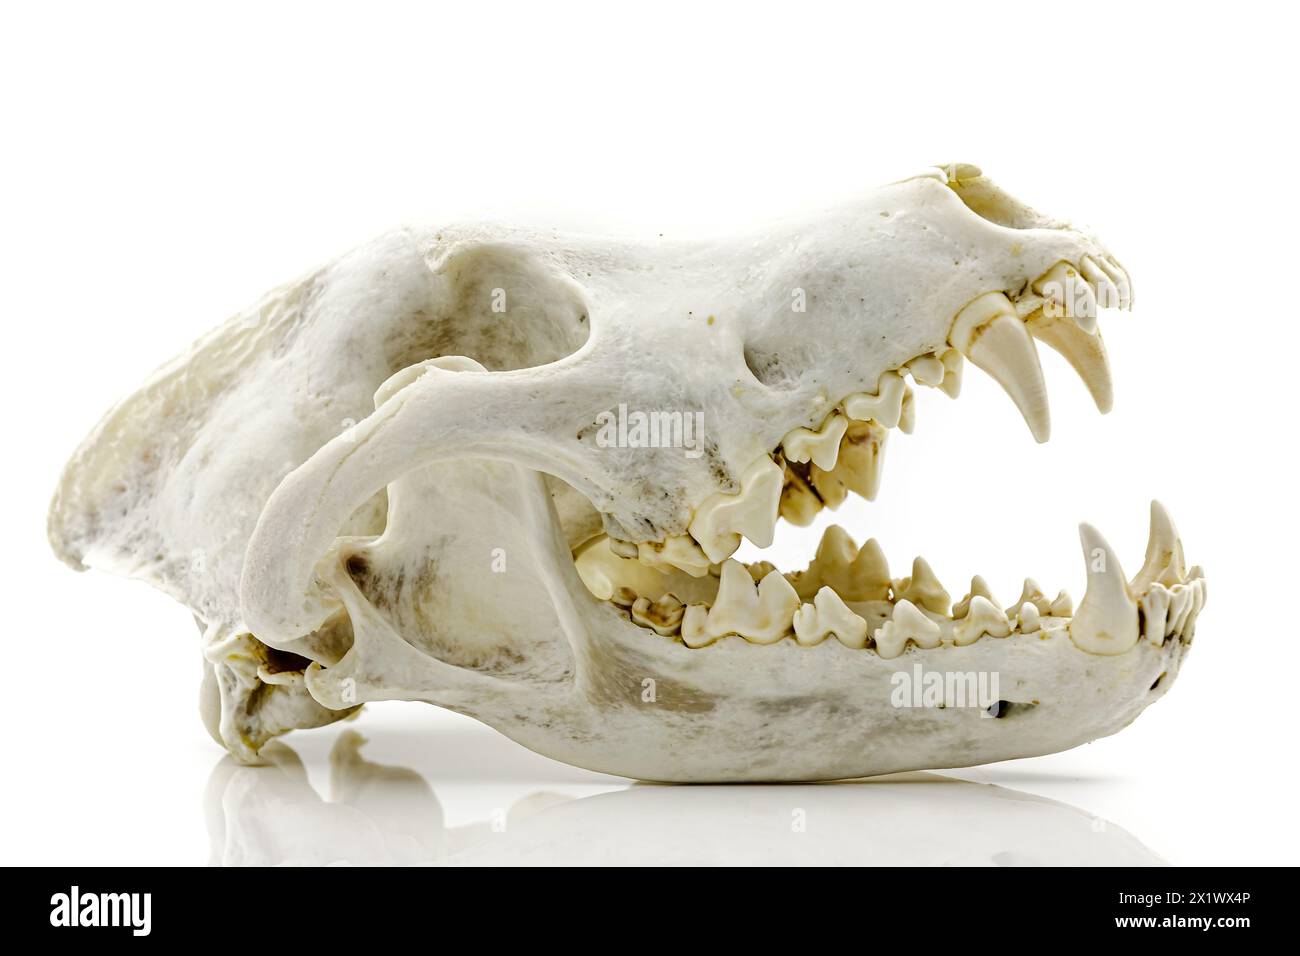 Trophy skull of an adult wolf on a white background. Selective focus with shallow depth of field. Stock Photo